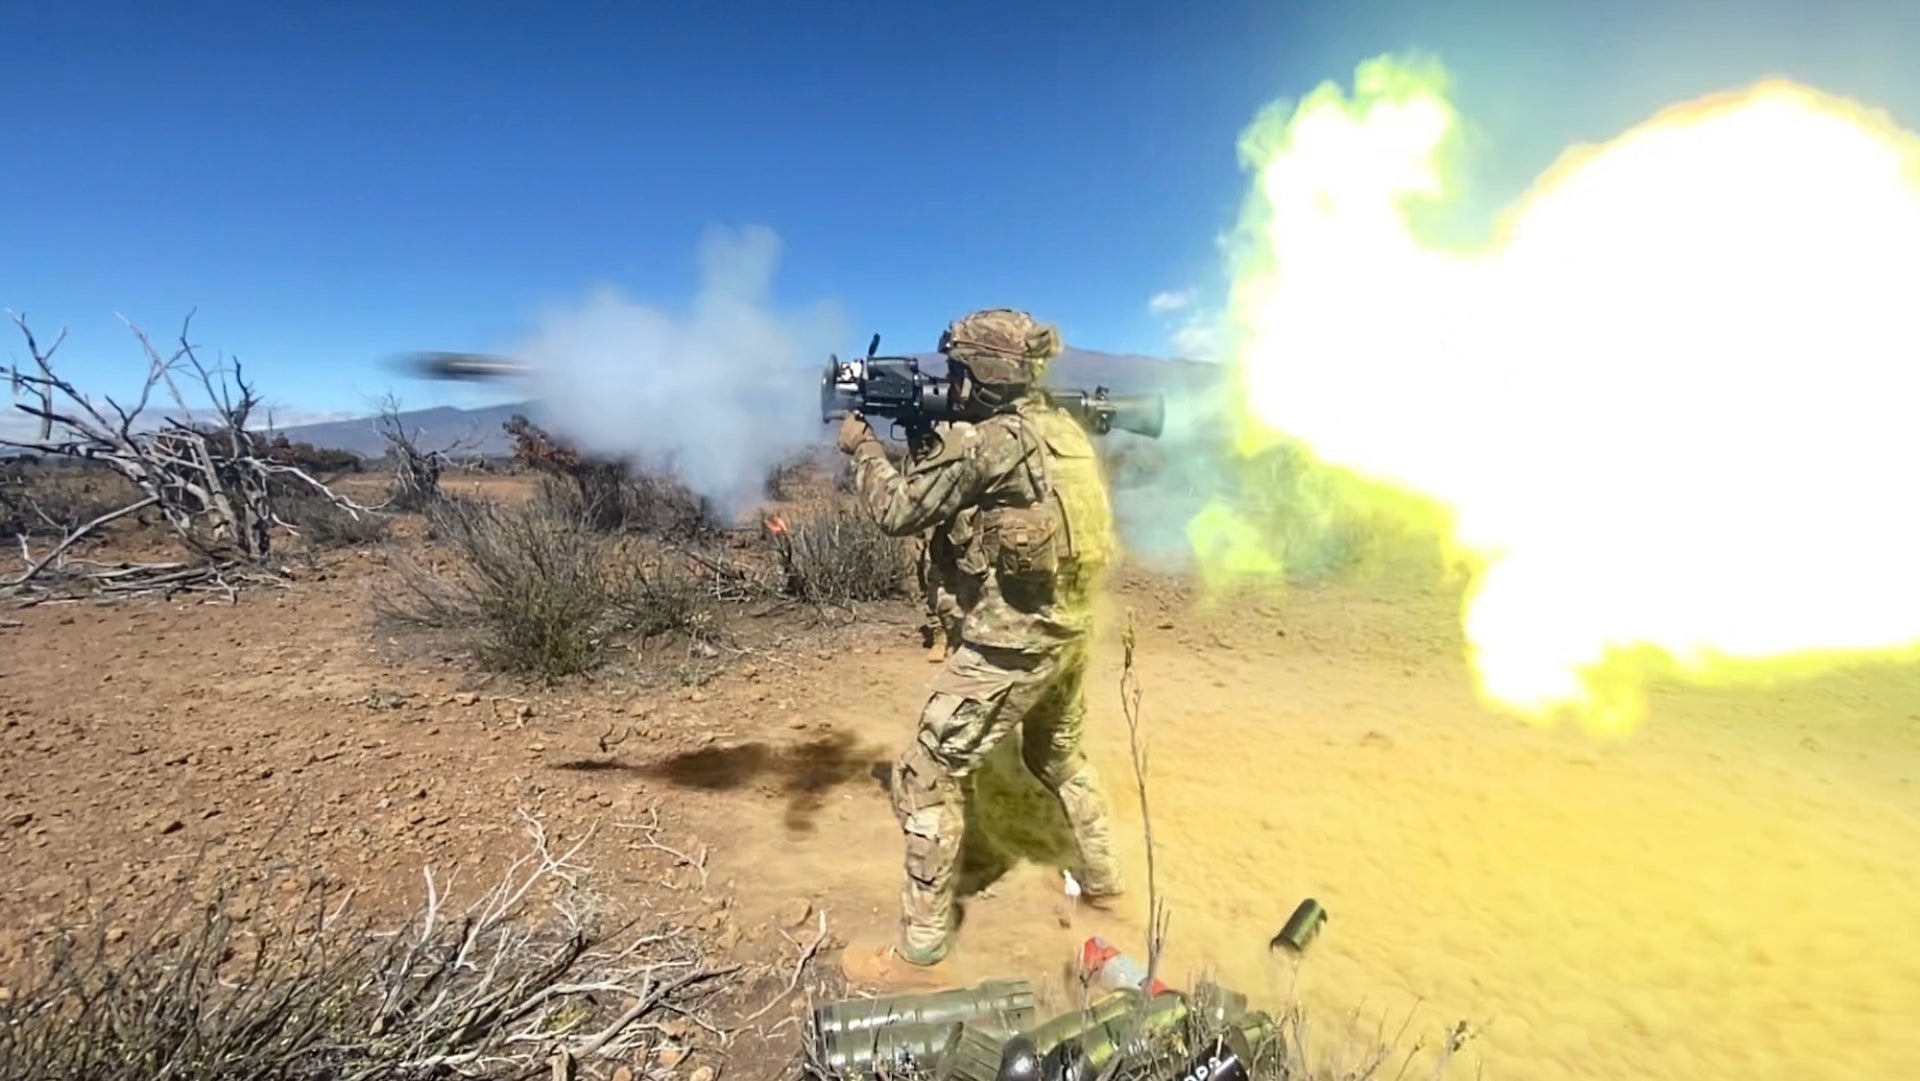 Spc. Jacob Pinola, a cavalry scout assigned to C Troop, 3rd Squadron, 4th Cavalry Regiment, 3rd Infantry Brigade Combat Team, 25th Infantry Division fires a Carl Gustav recoilless rifle during a live-fire training event at Pōhakuloa Training Area, Hawaii Feb. 10, 2022. (U.S. Army photo by Staff Sgt. Brendan Spangler)